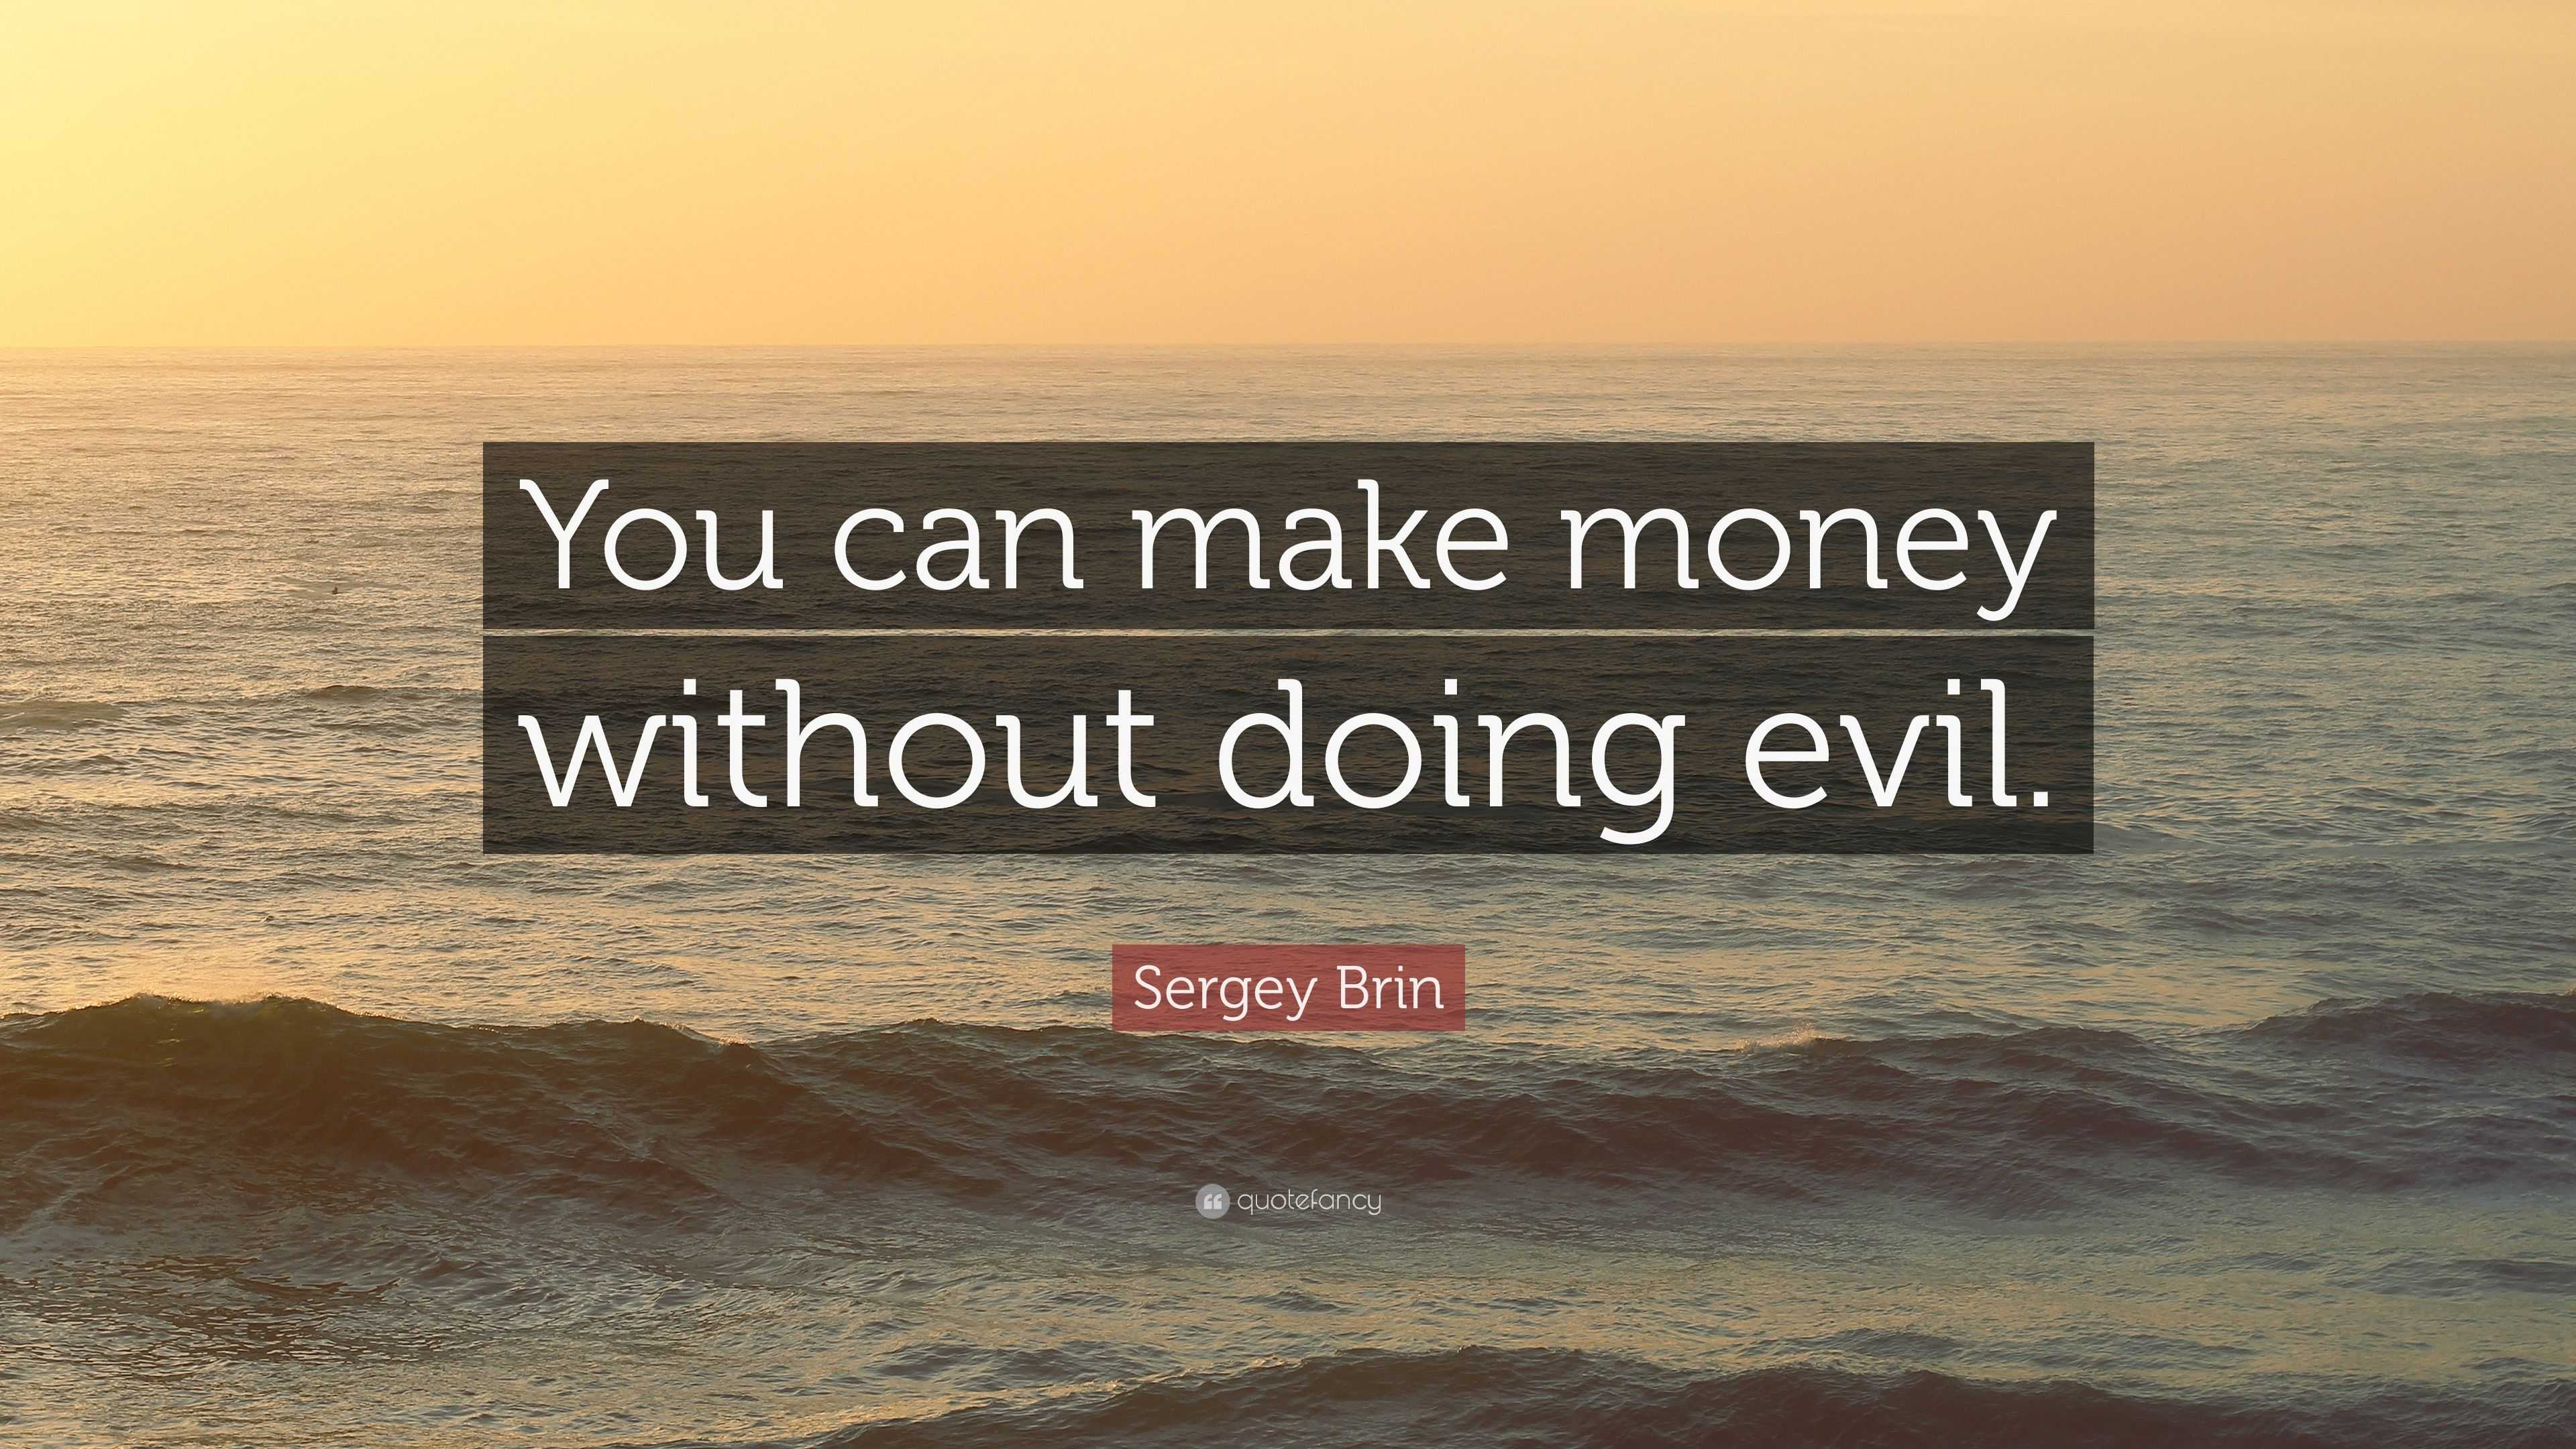 you can make money without being evil